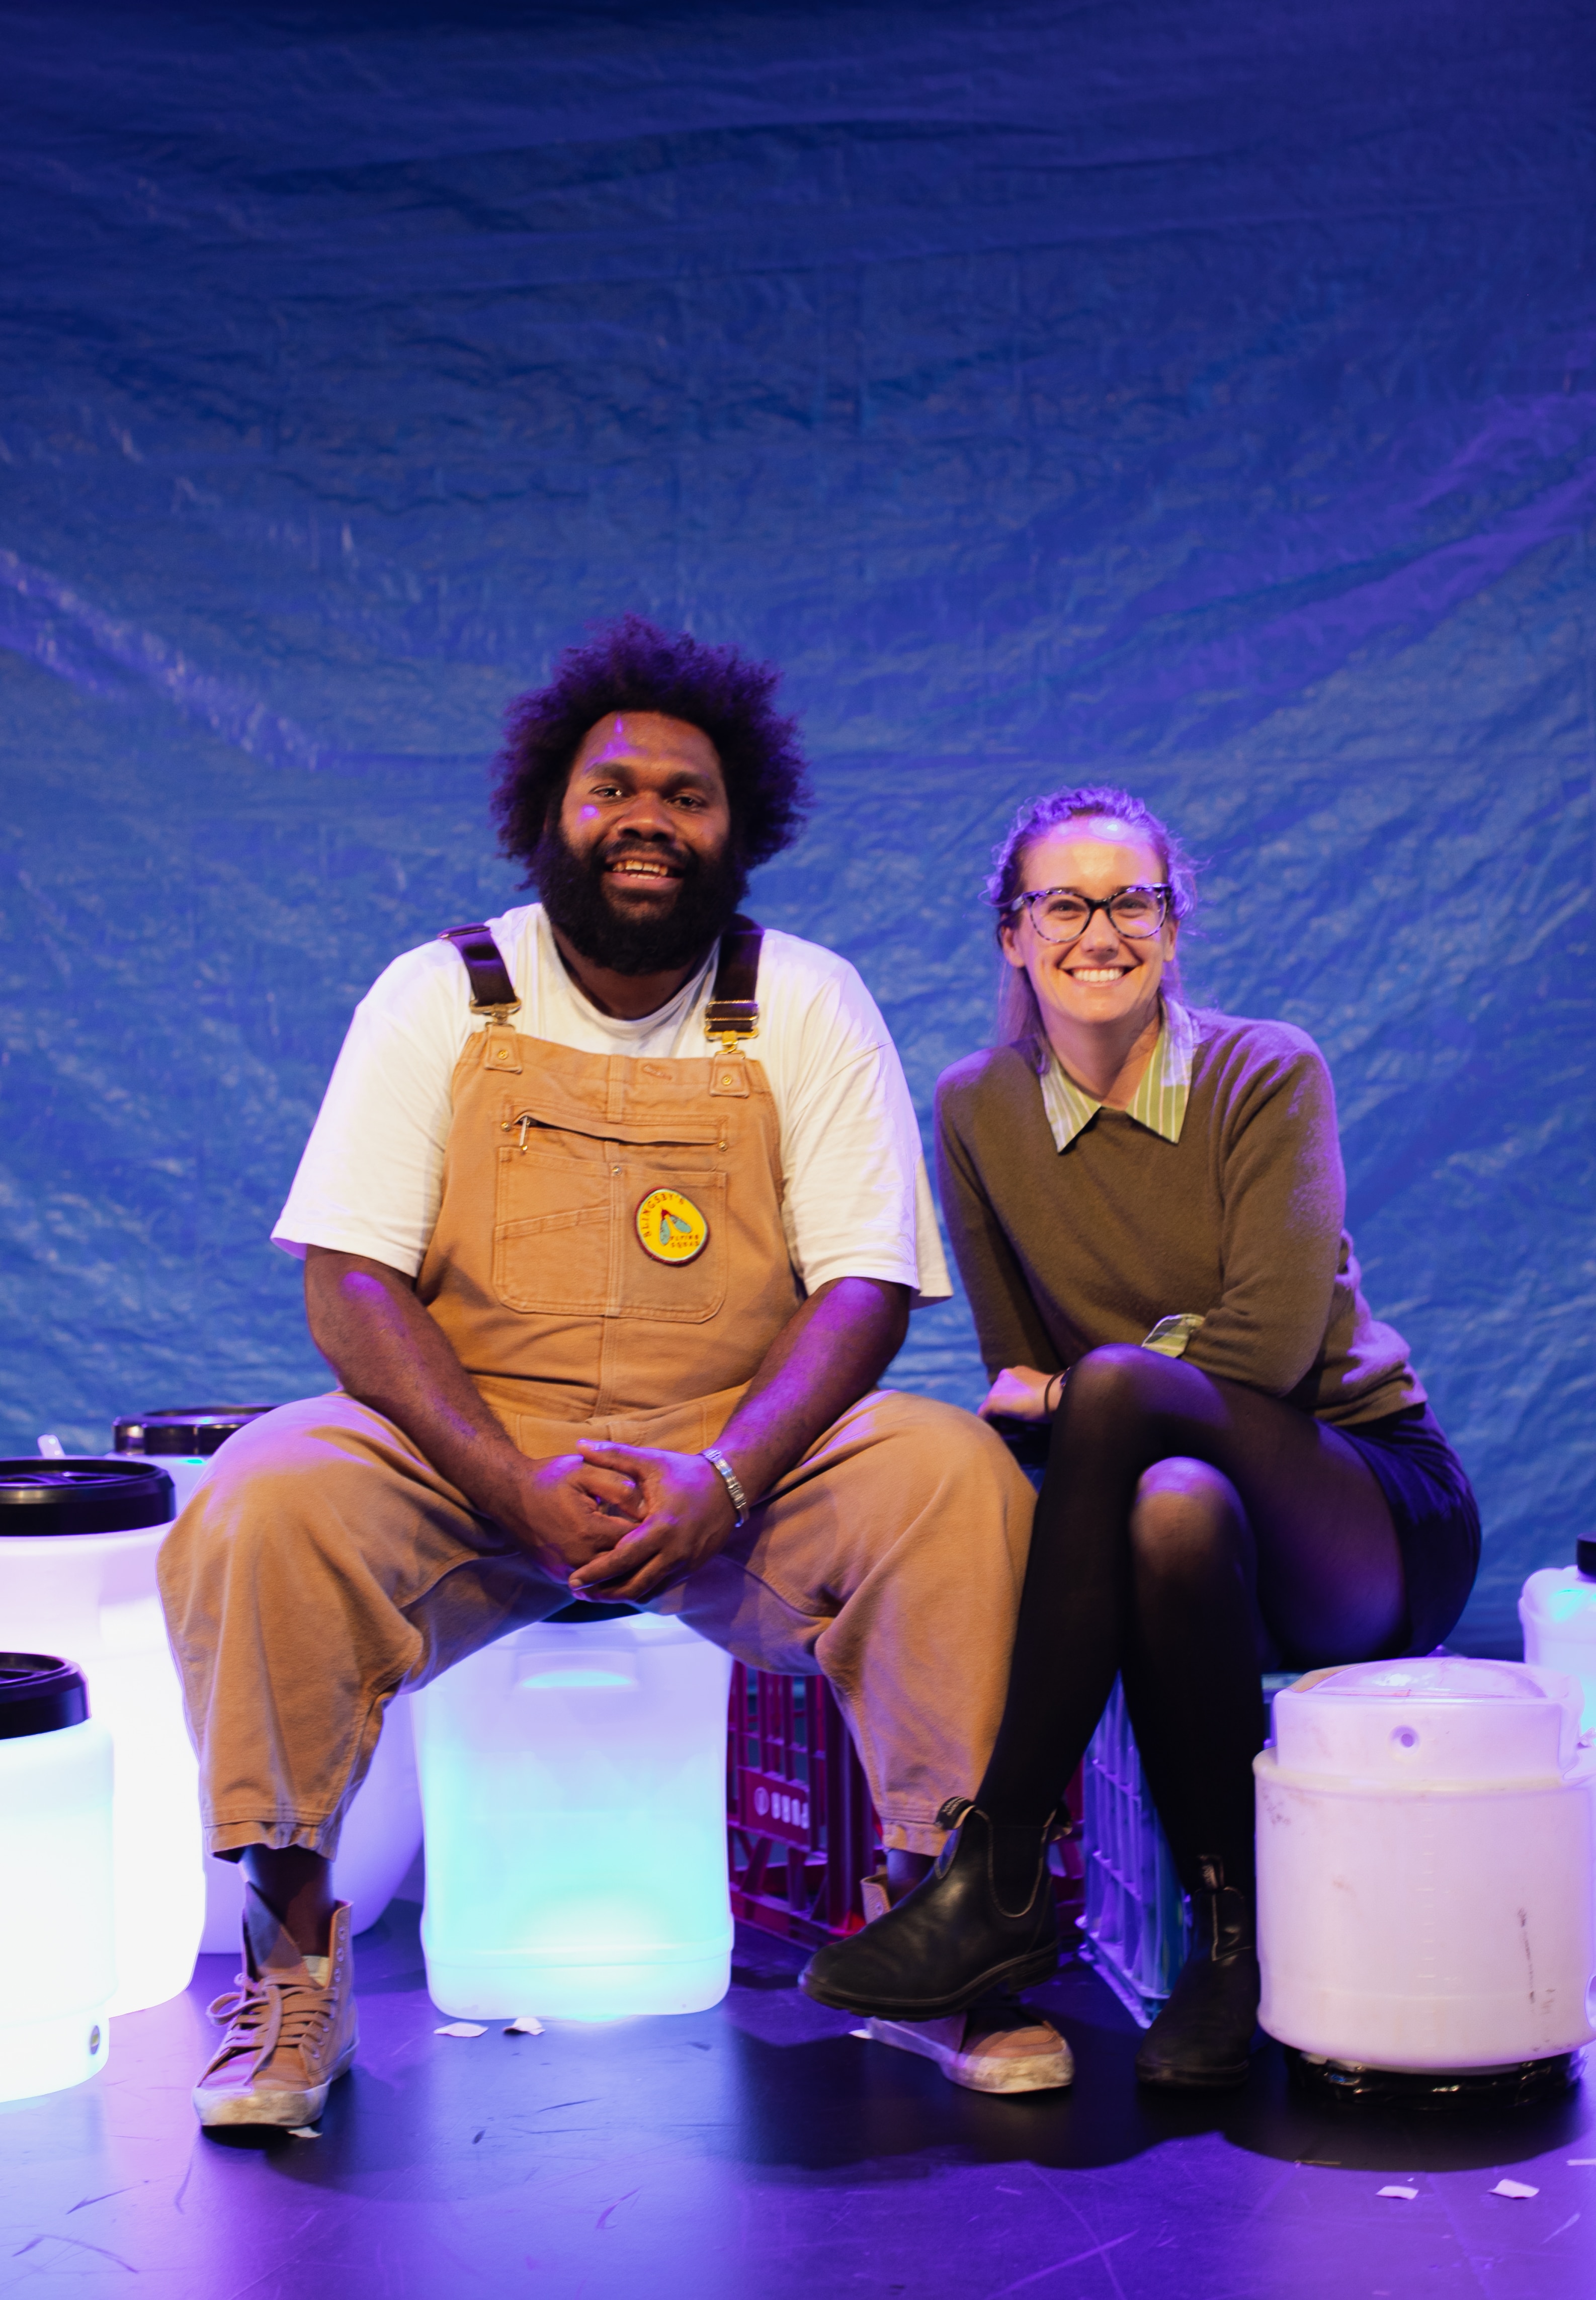 Indigenous man wearing caramel overalls sits on a blue-lit stage beside a white woman in khaki jumper with glasses.